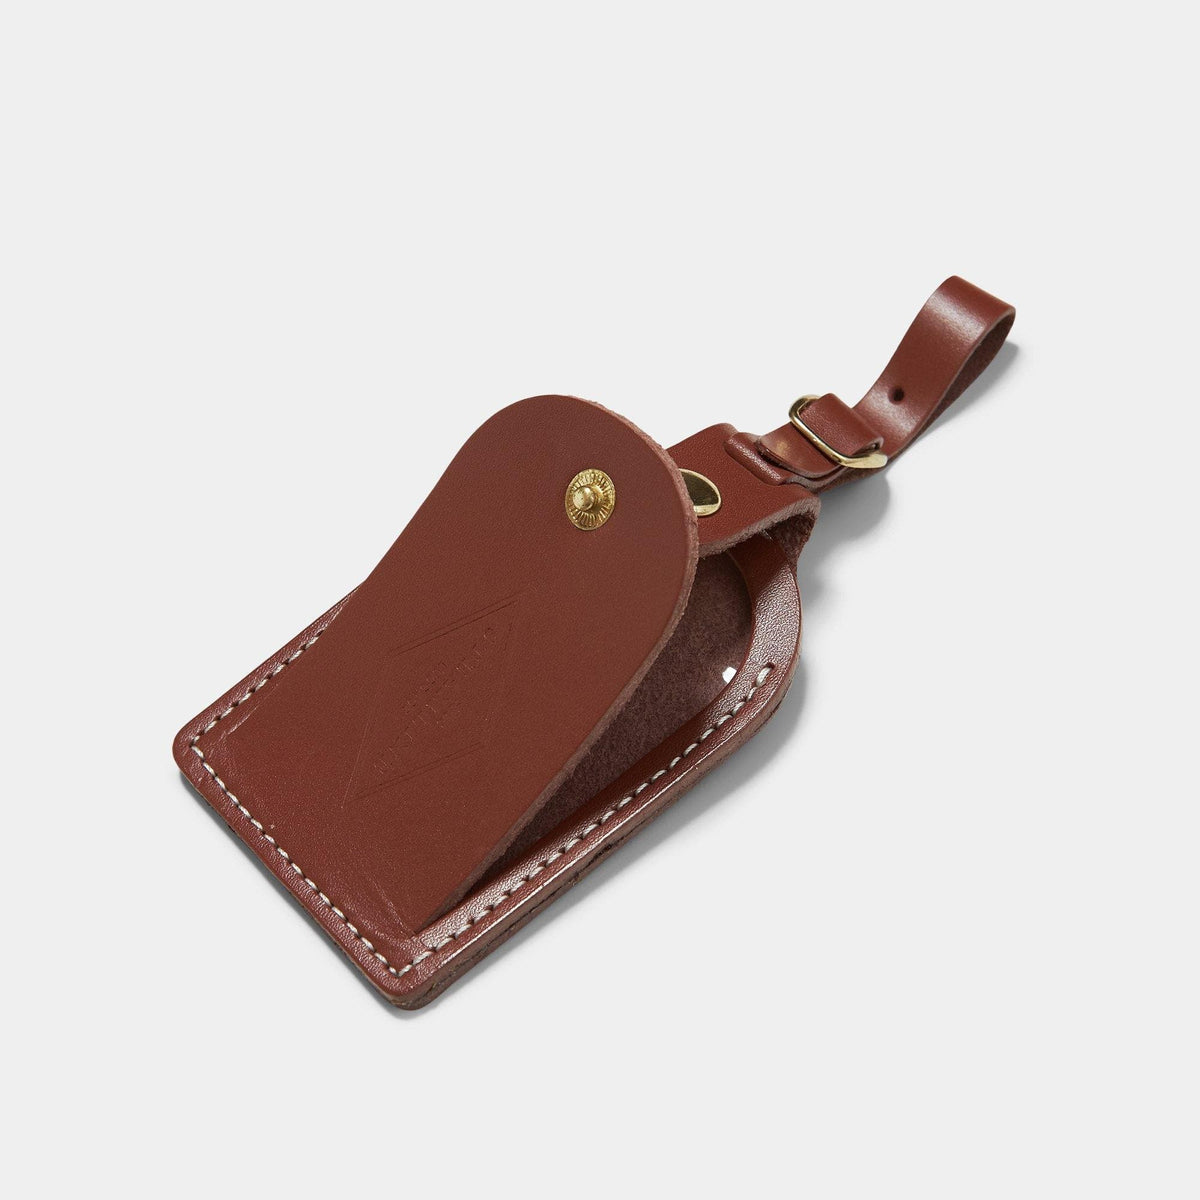 British Brown Leather - Luggage Tag Accessories Steamline Luggage 